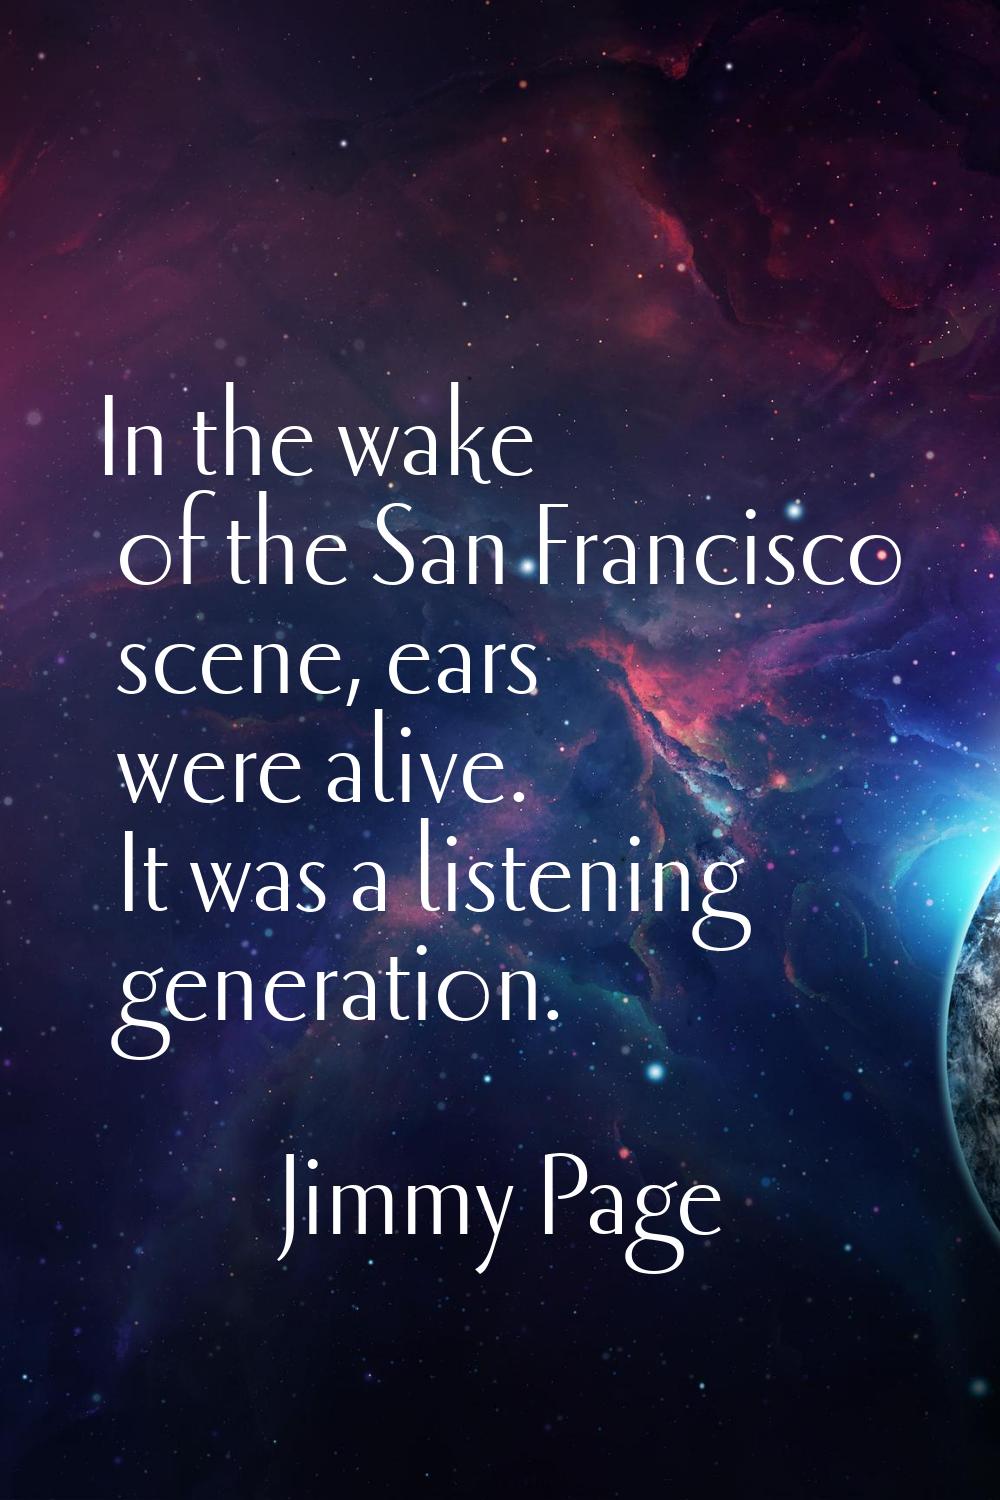 In the wake of the San Francisco scene, ears were alive. It was a listening generation.